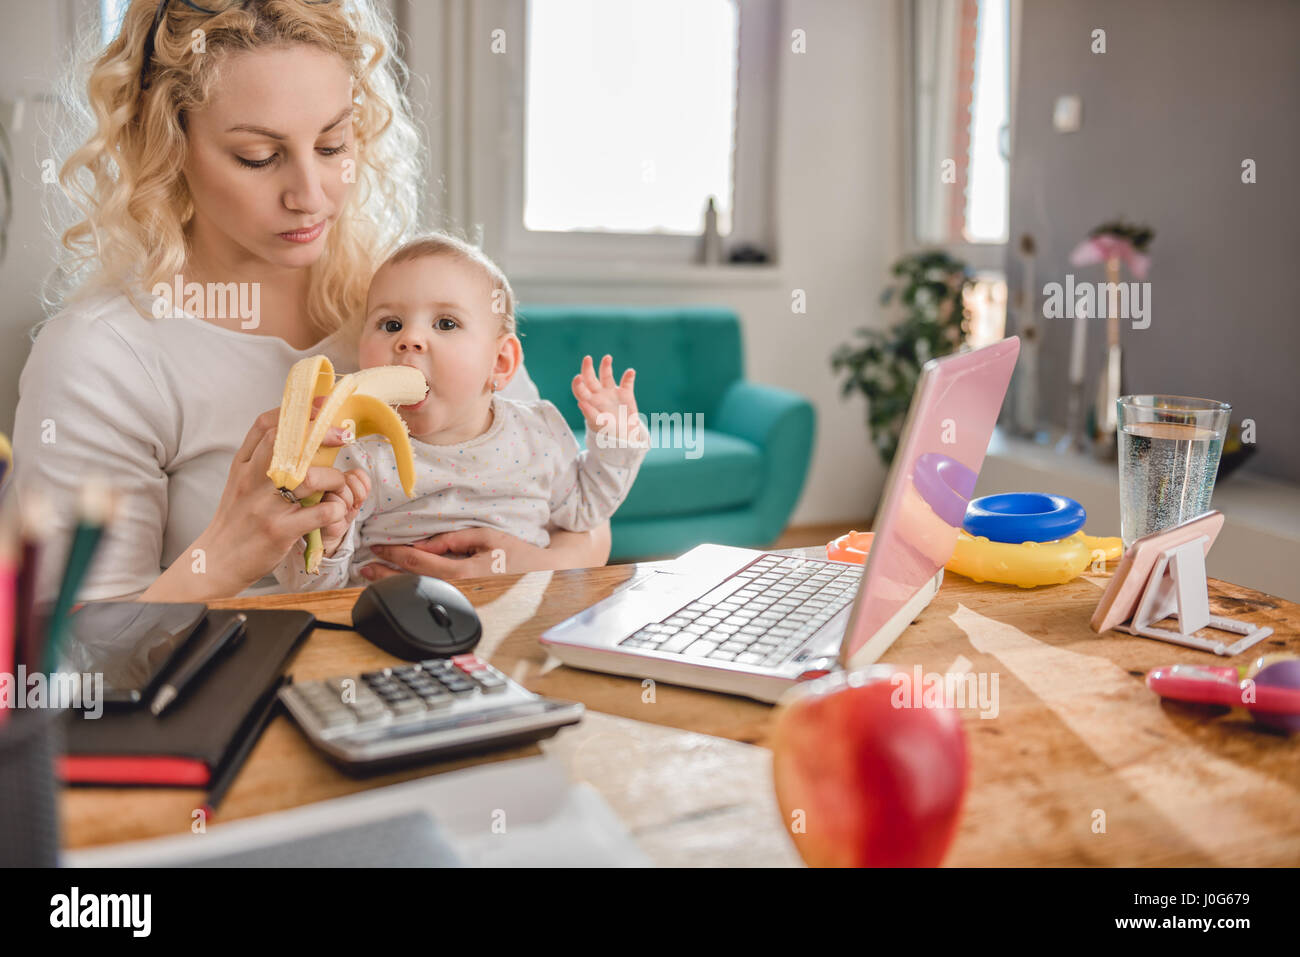 Mother feeding baby at home office with bananas Stock Photo